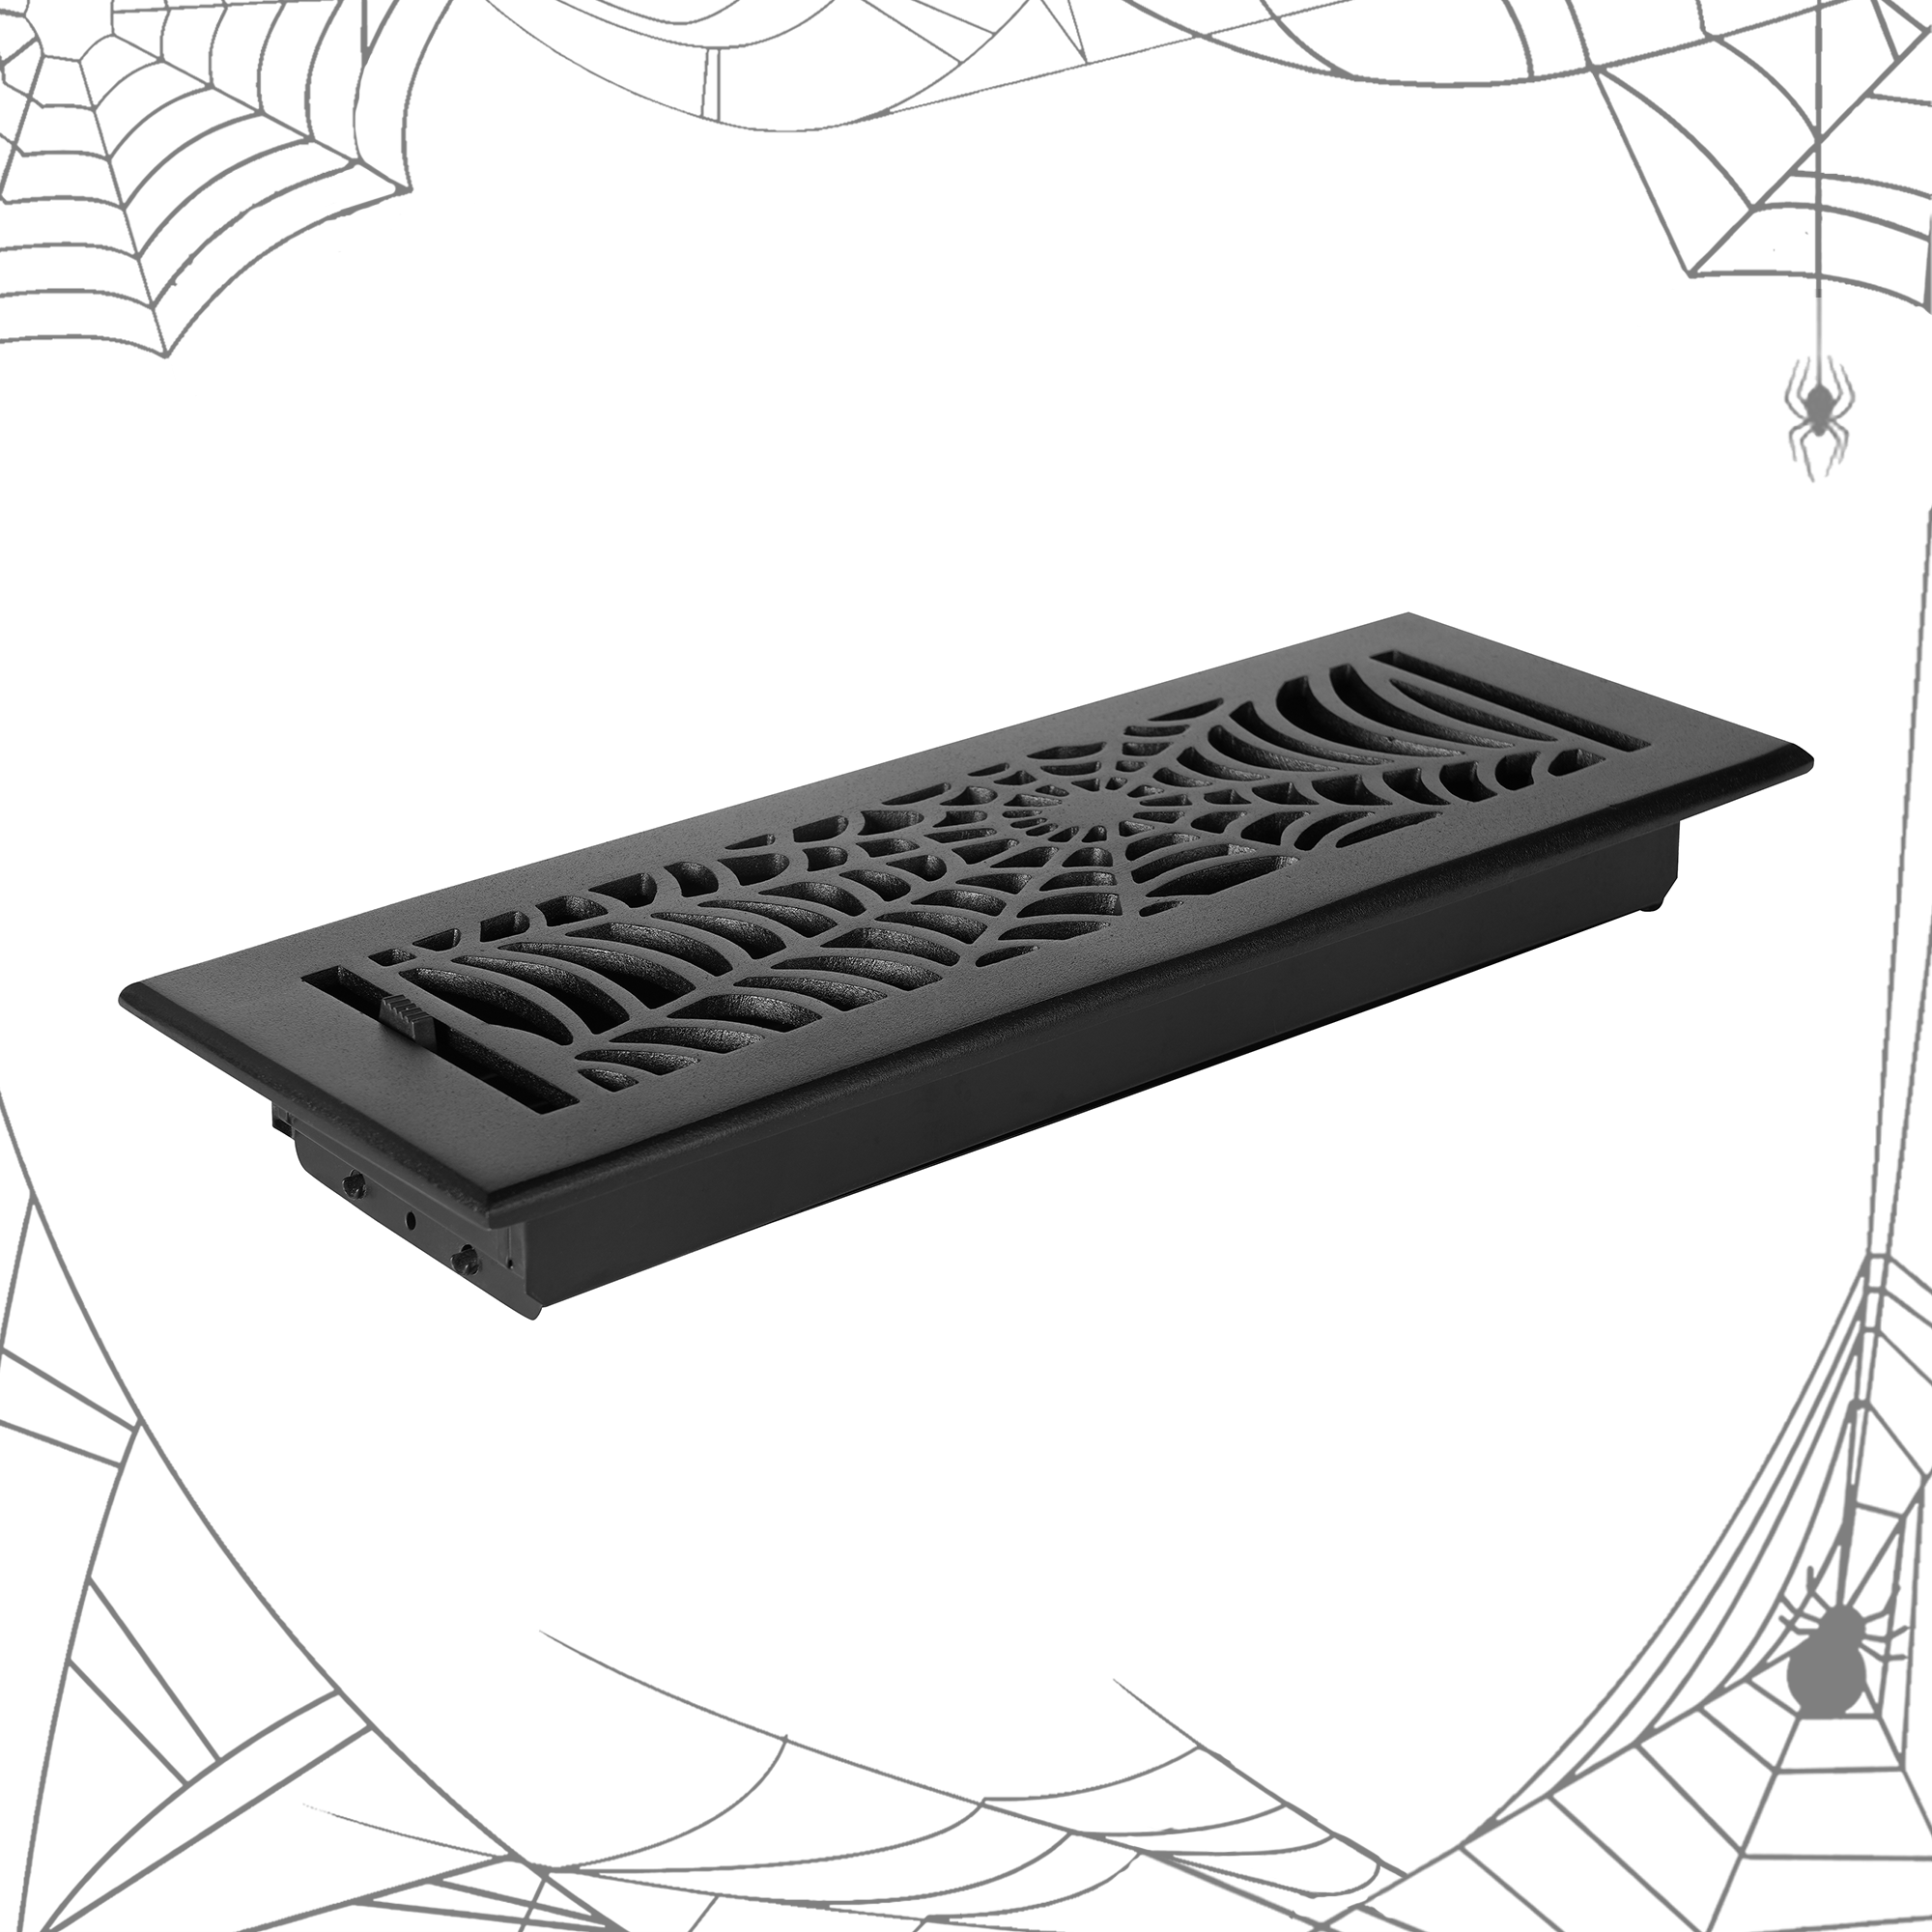 Spooky Gothic 4"x14"Solid Cast Aluminum louvered Air Supply |Powder Coated